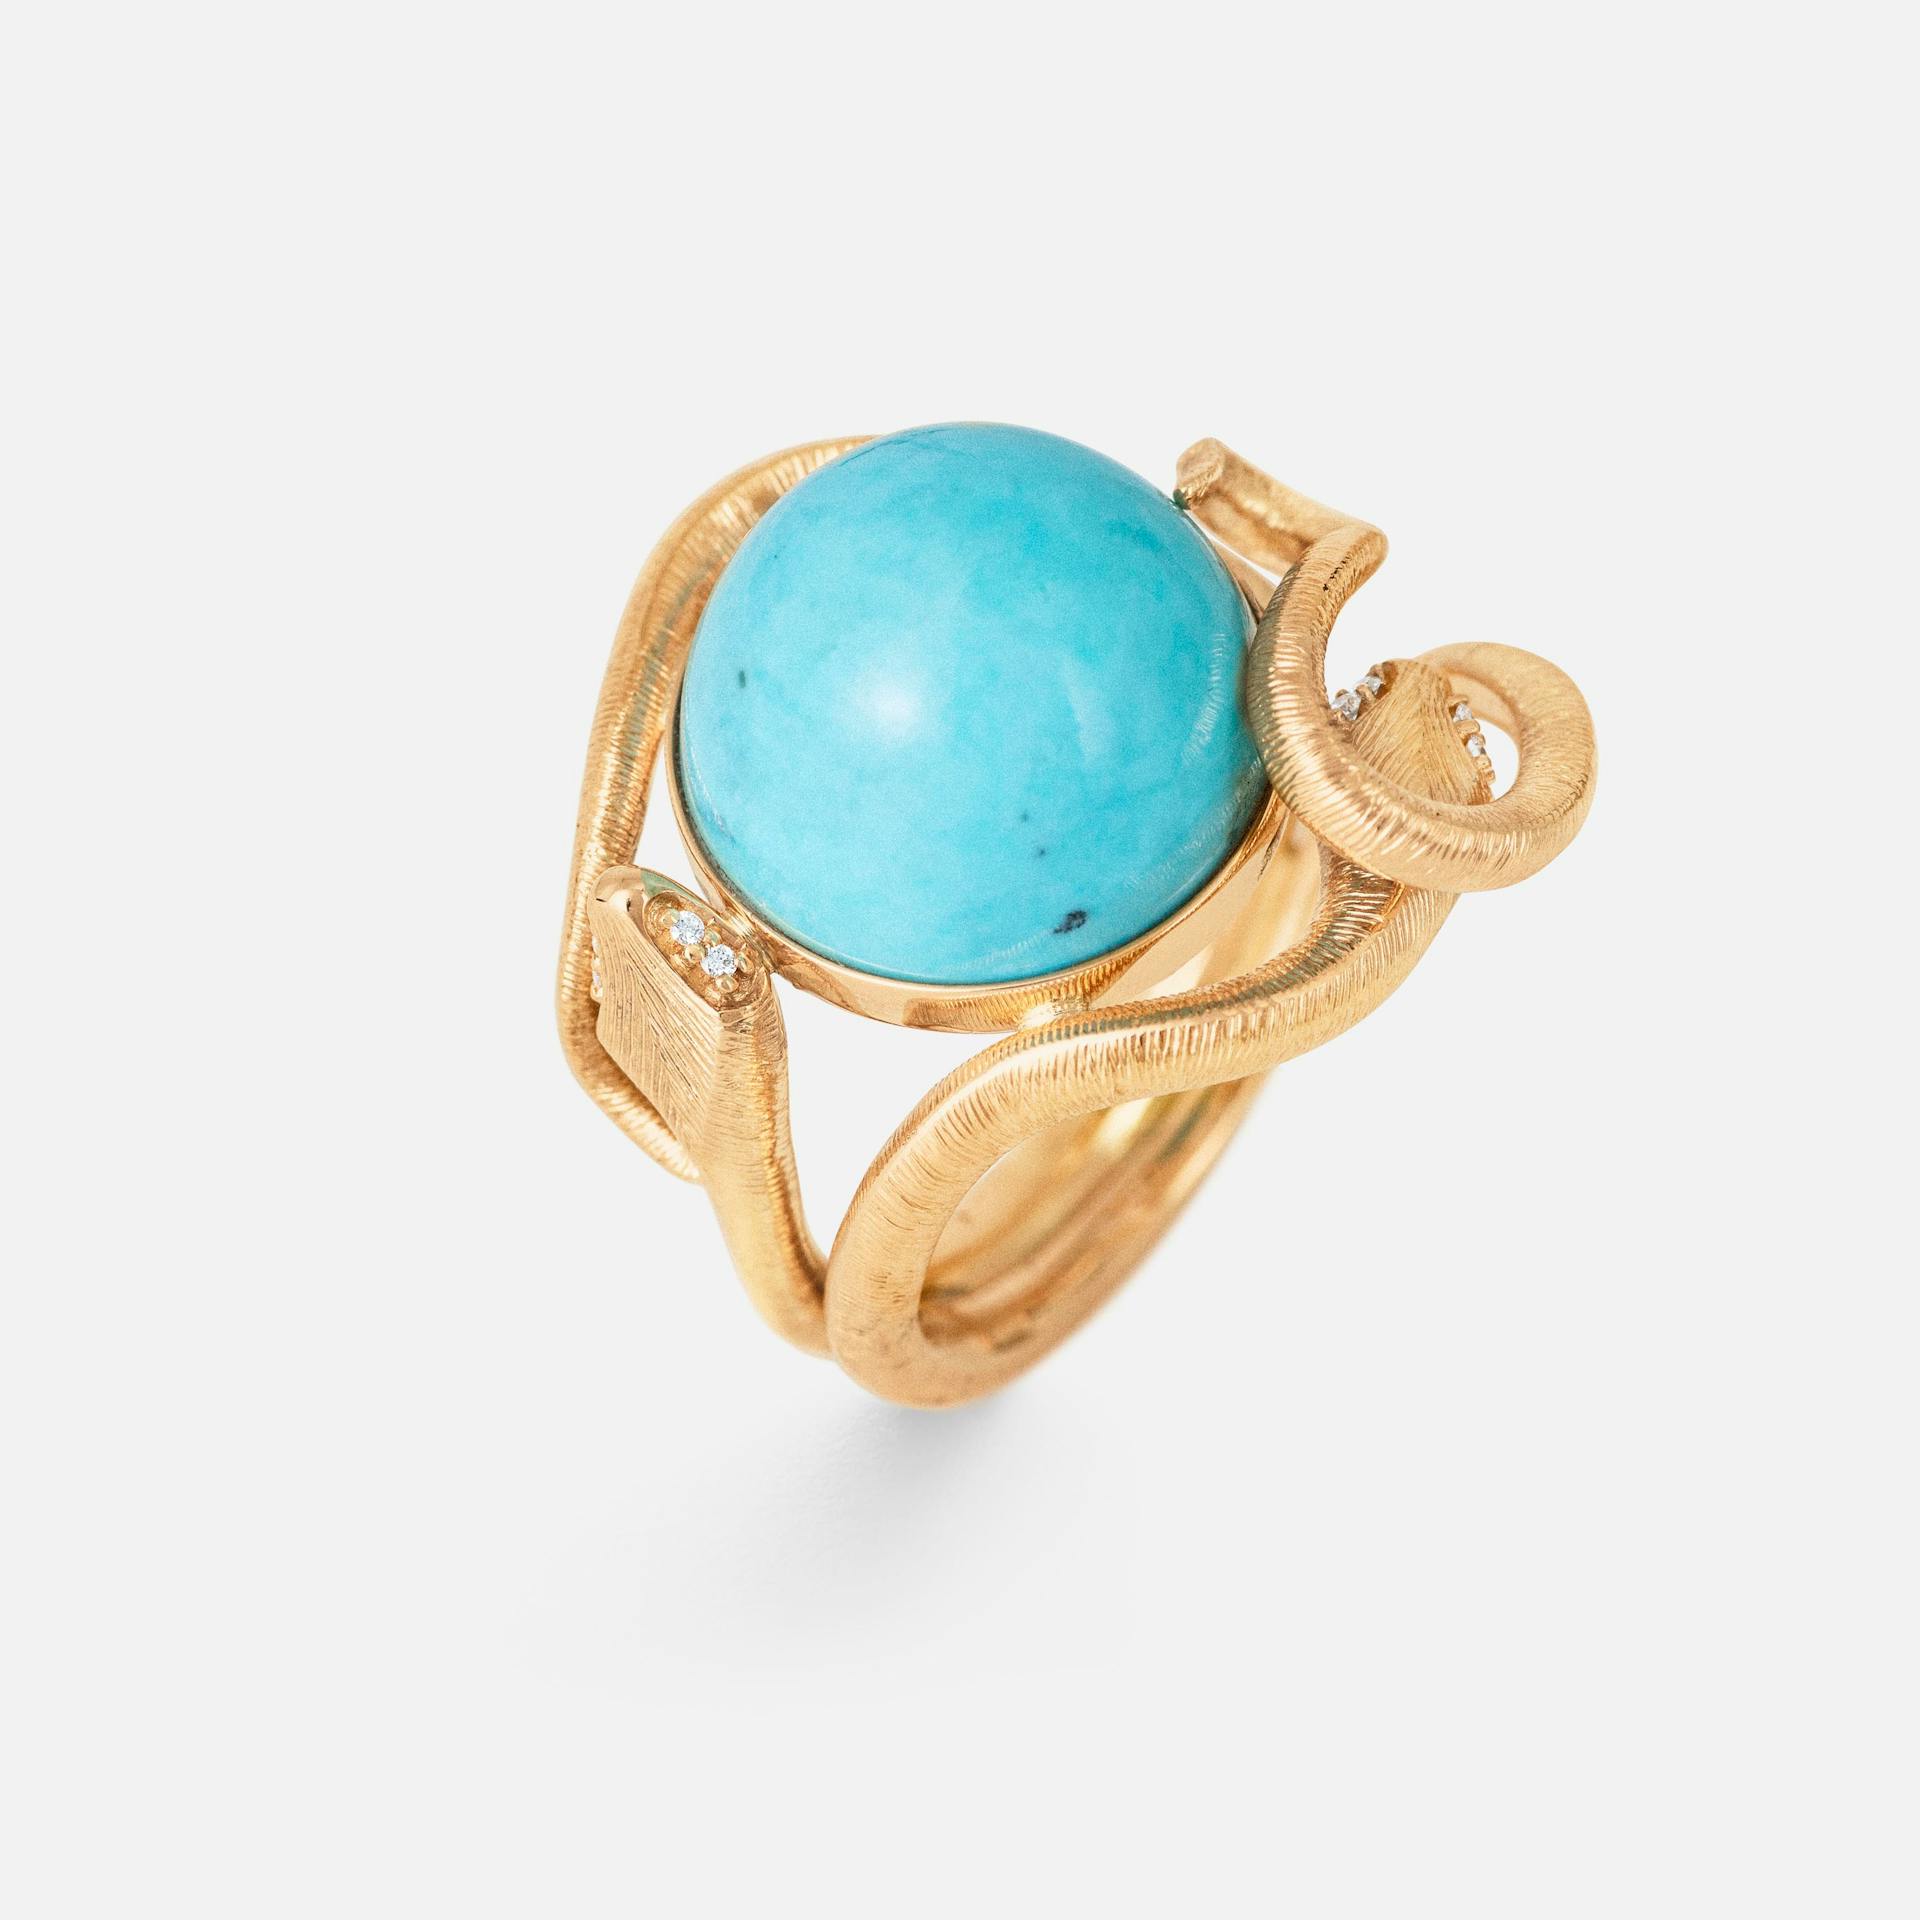 Snakes ring 18k gold with turquoise and diamonds 0.04 ct. TW.VS.